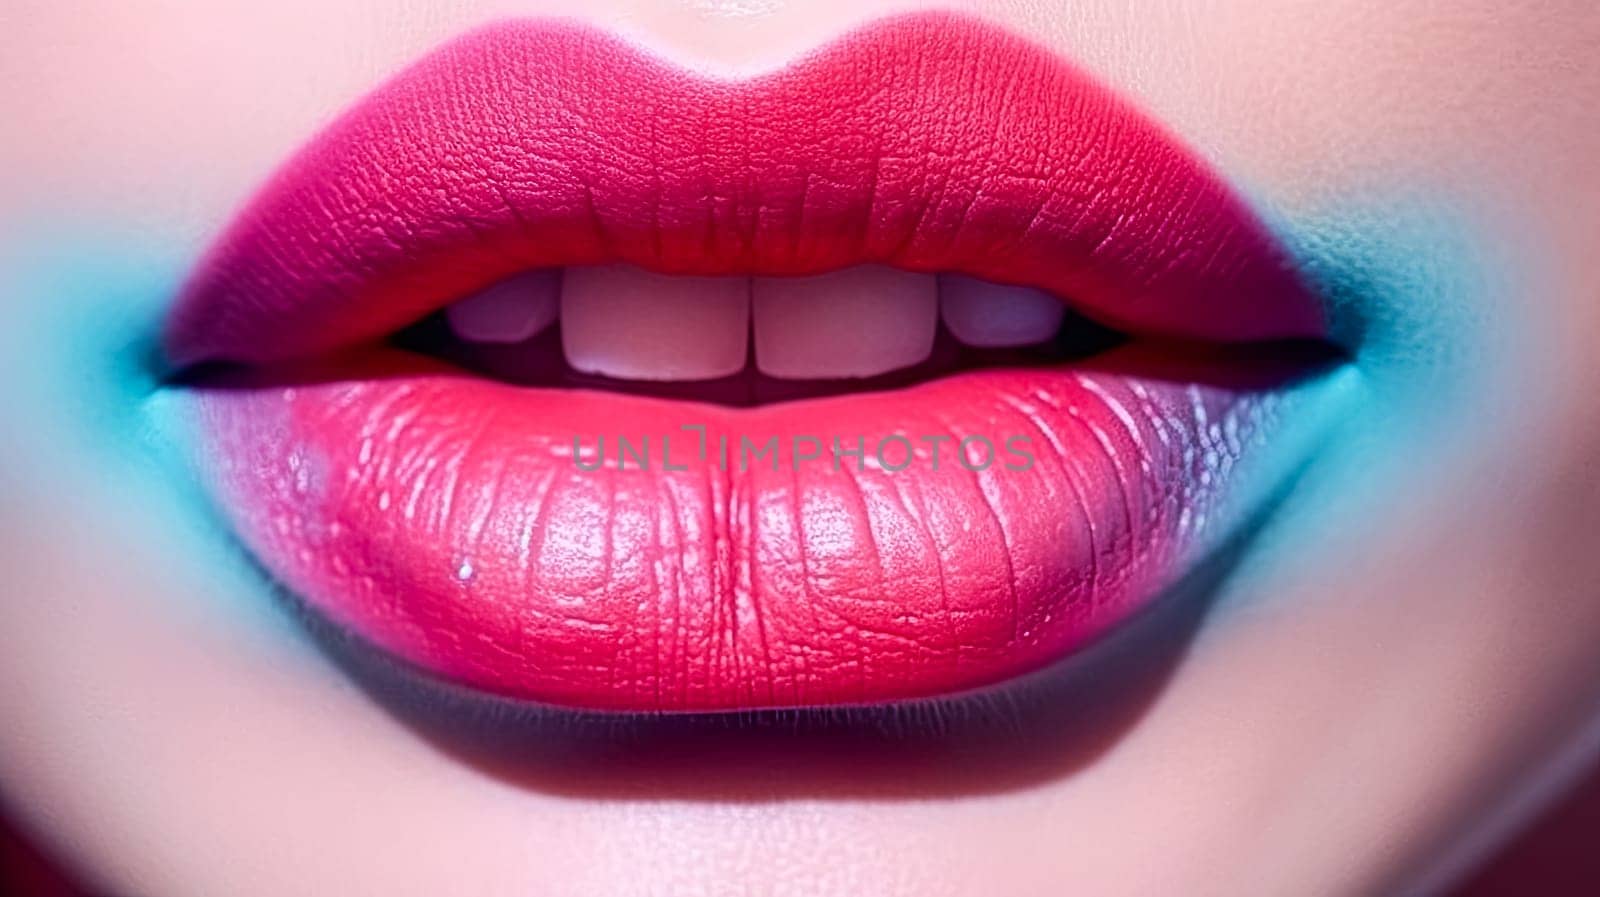 A woman's lips are painted red. The lips are very prominent in the image